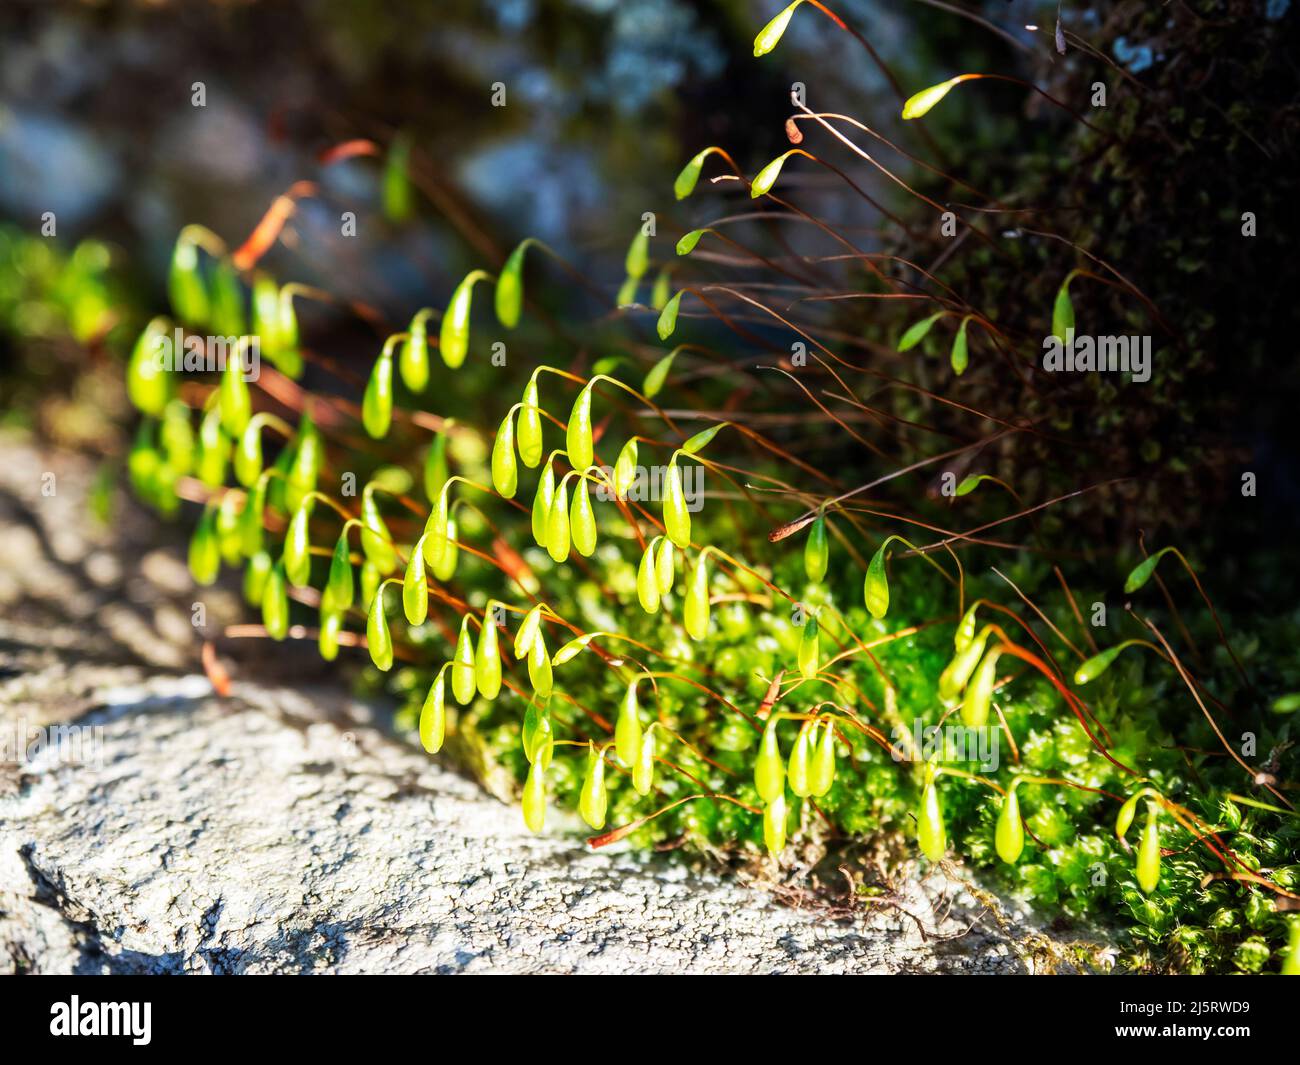 Spore cases on clumps of moss on a wall in Ambleside, Lake District, UK. Stock Photo